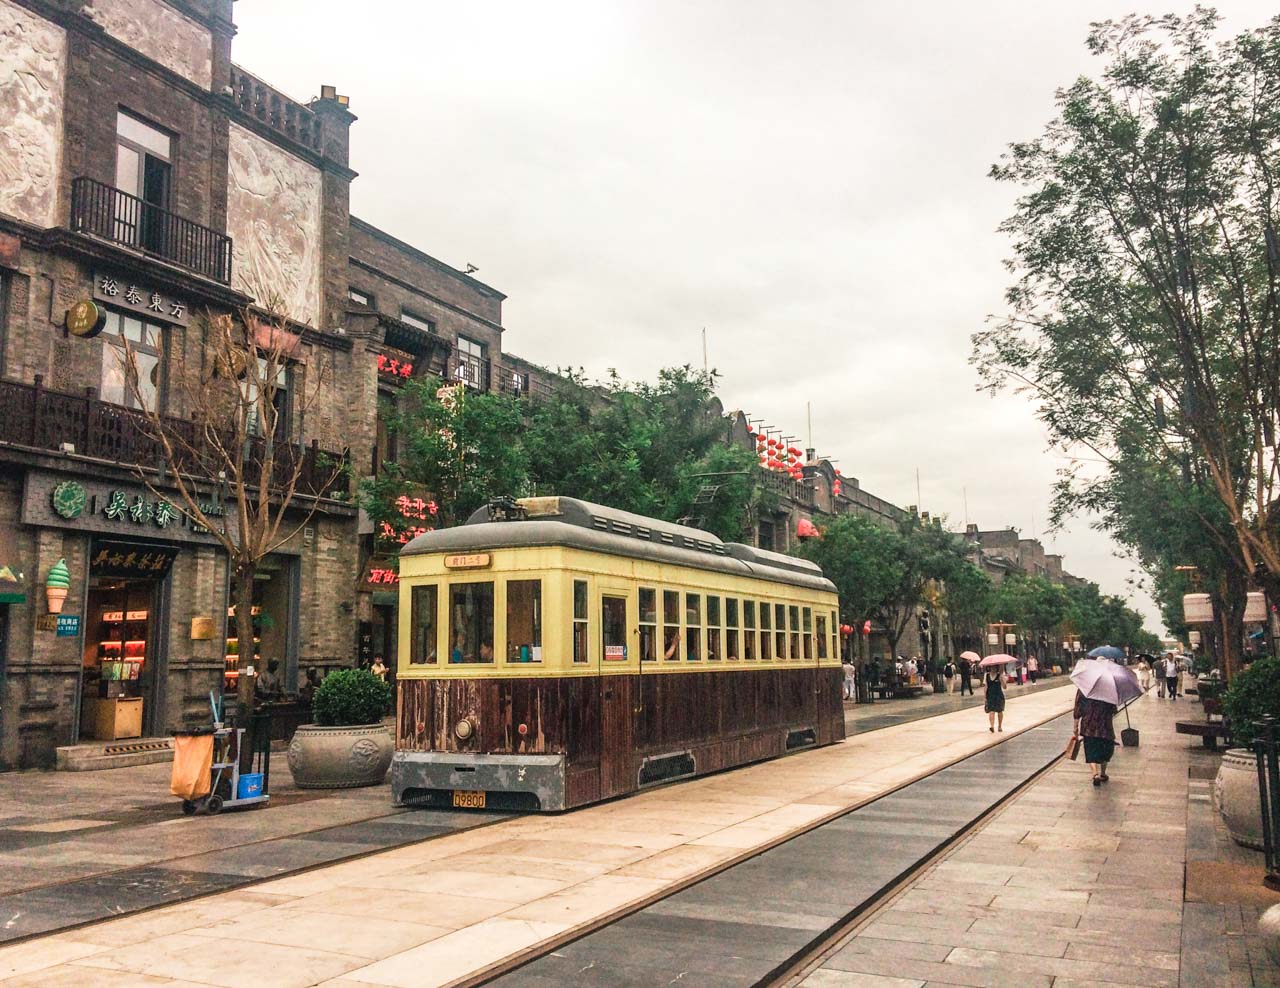 An old vintage tram in Qianmen Street, the oldest commercial street in Beijing, China